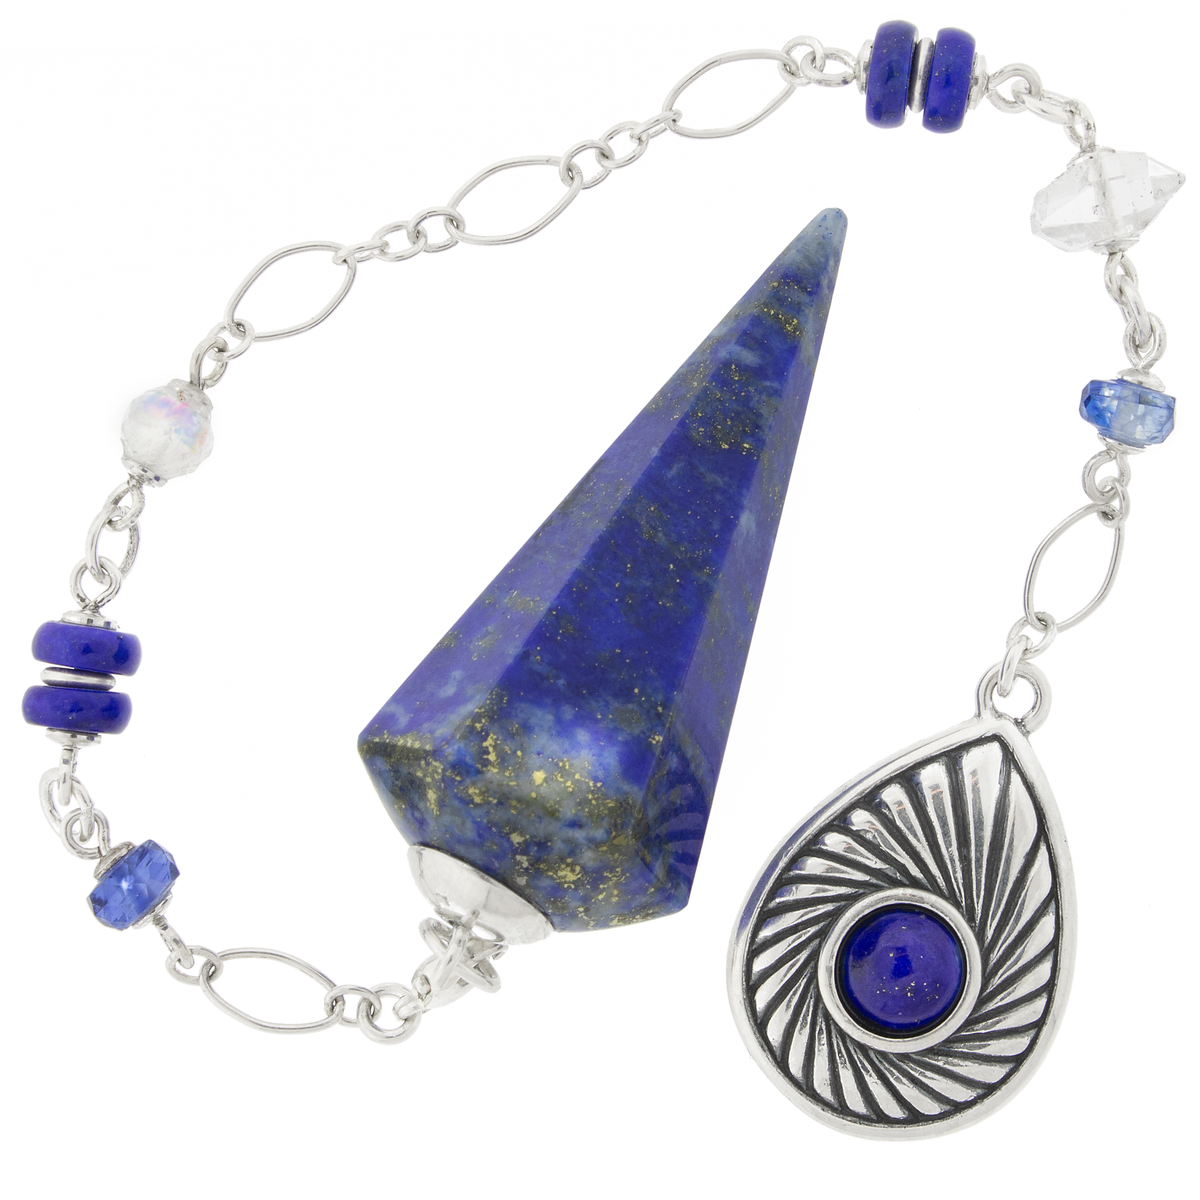 One of a Kind #364 - Lapis Lazuli, Kyanite, Rainbow Moonstone, Herkimer Diamond and Sterling Silver Pendulum by Ask Your Pendulum